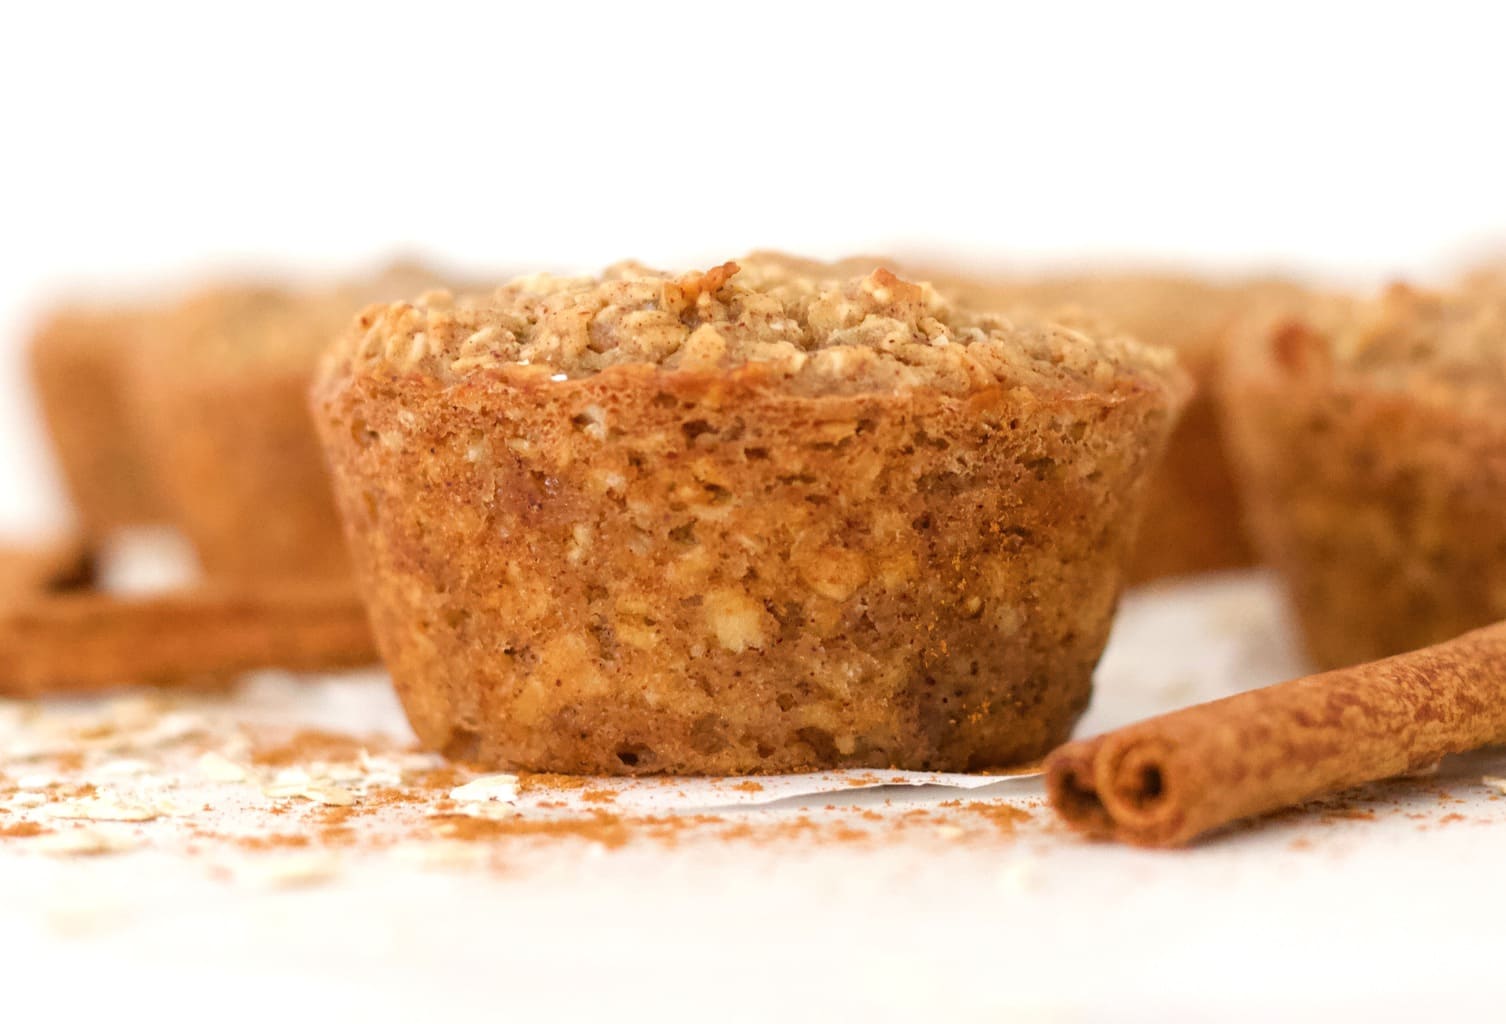 You will LOVE these super healthy & delicious Cinnamon Roll Protein Oatmeal Muffins! They are vegan, gluten-free, dairy-free, sugar-free, oil-free, low-carb, and low-calorie - only 87 calories each! Made with tofu for a powerful protein boost - the perfect, filling, vegan breakfast.